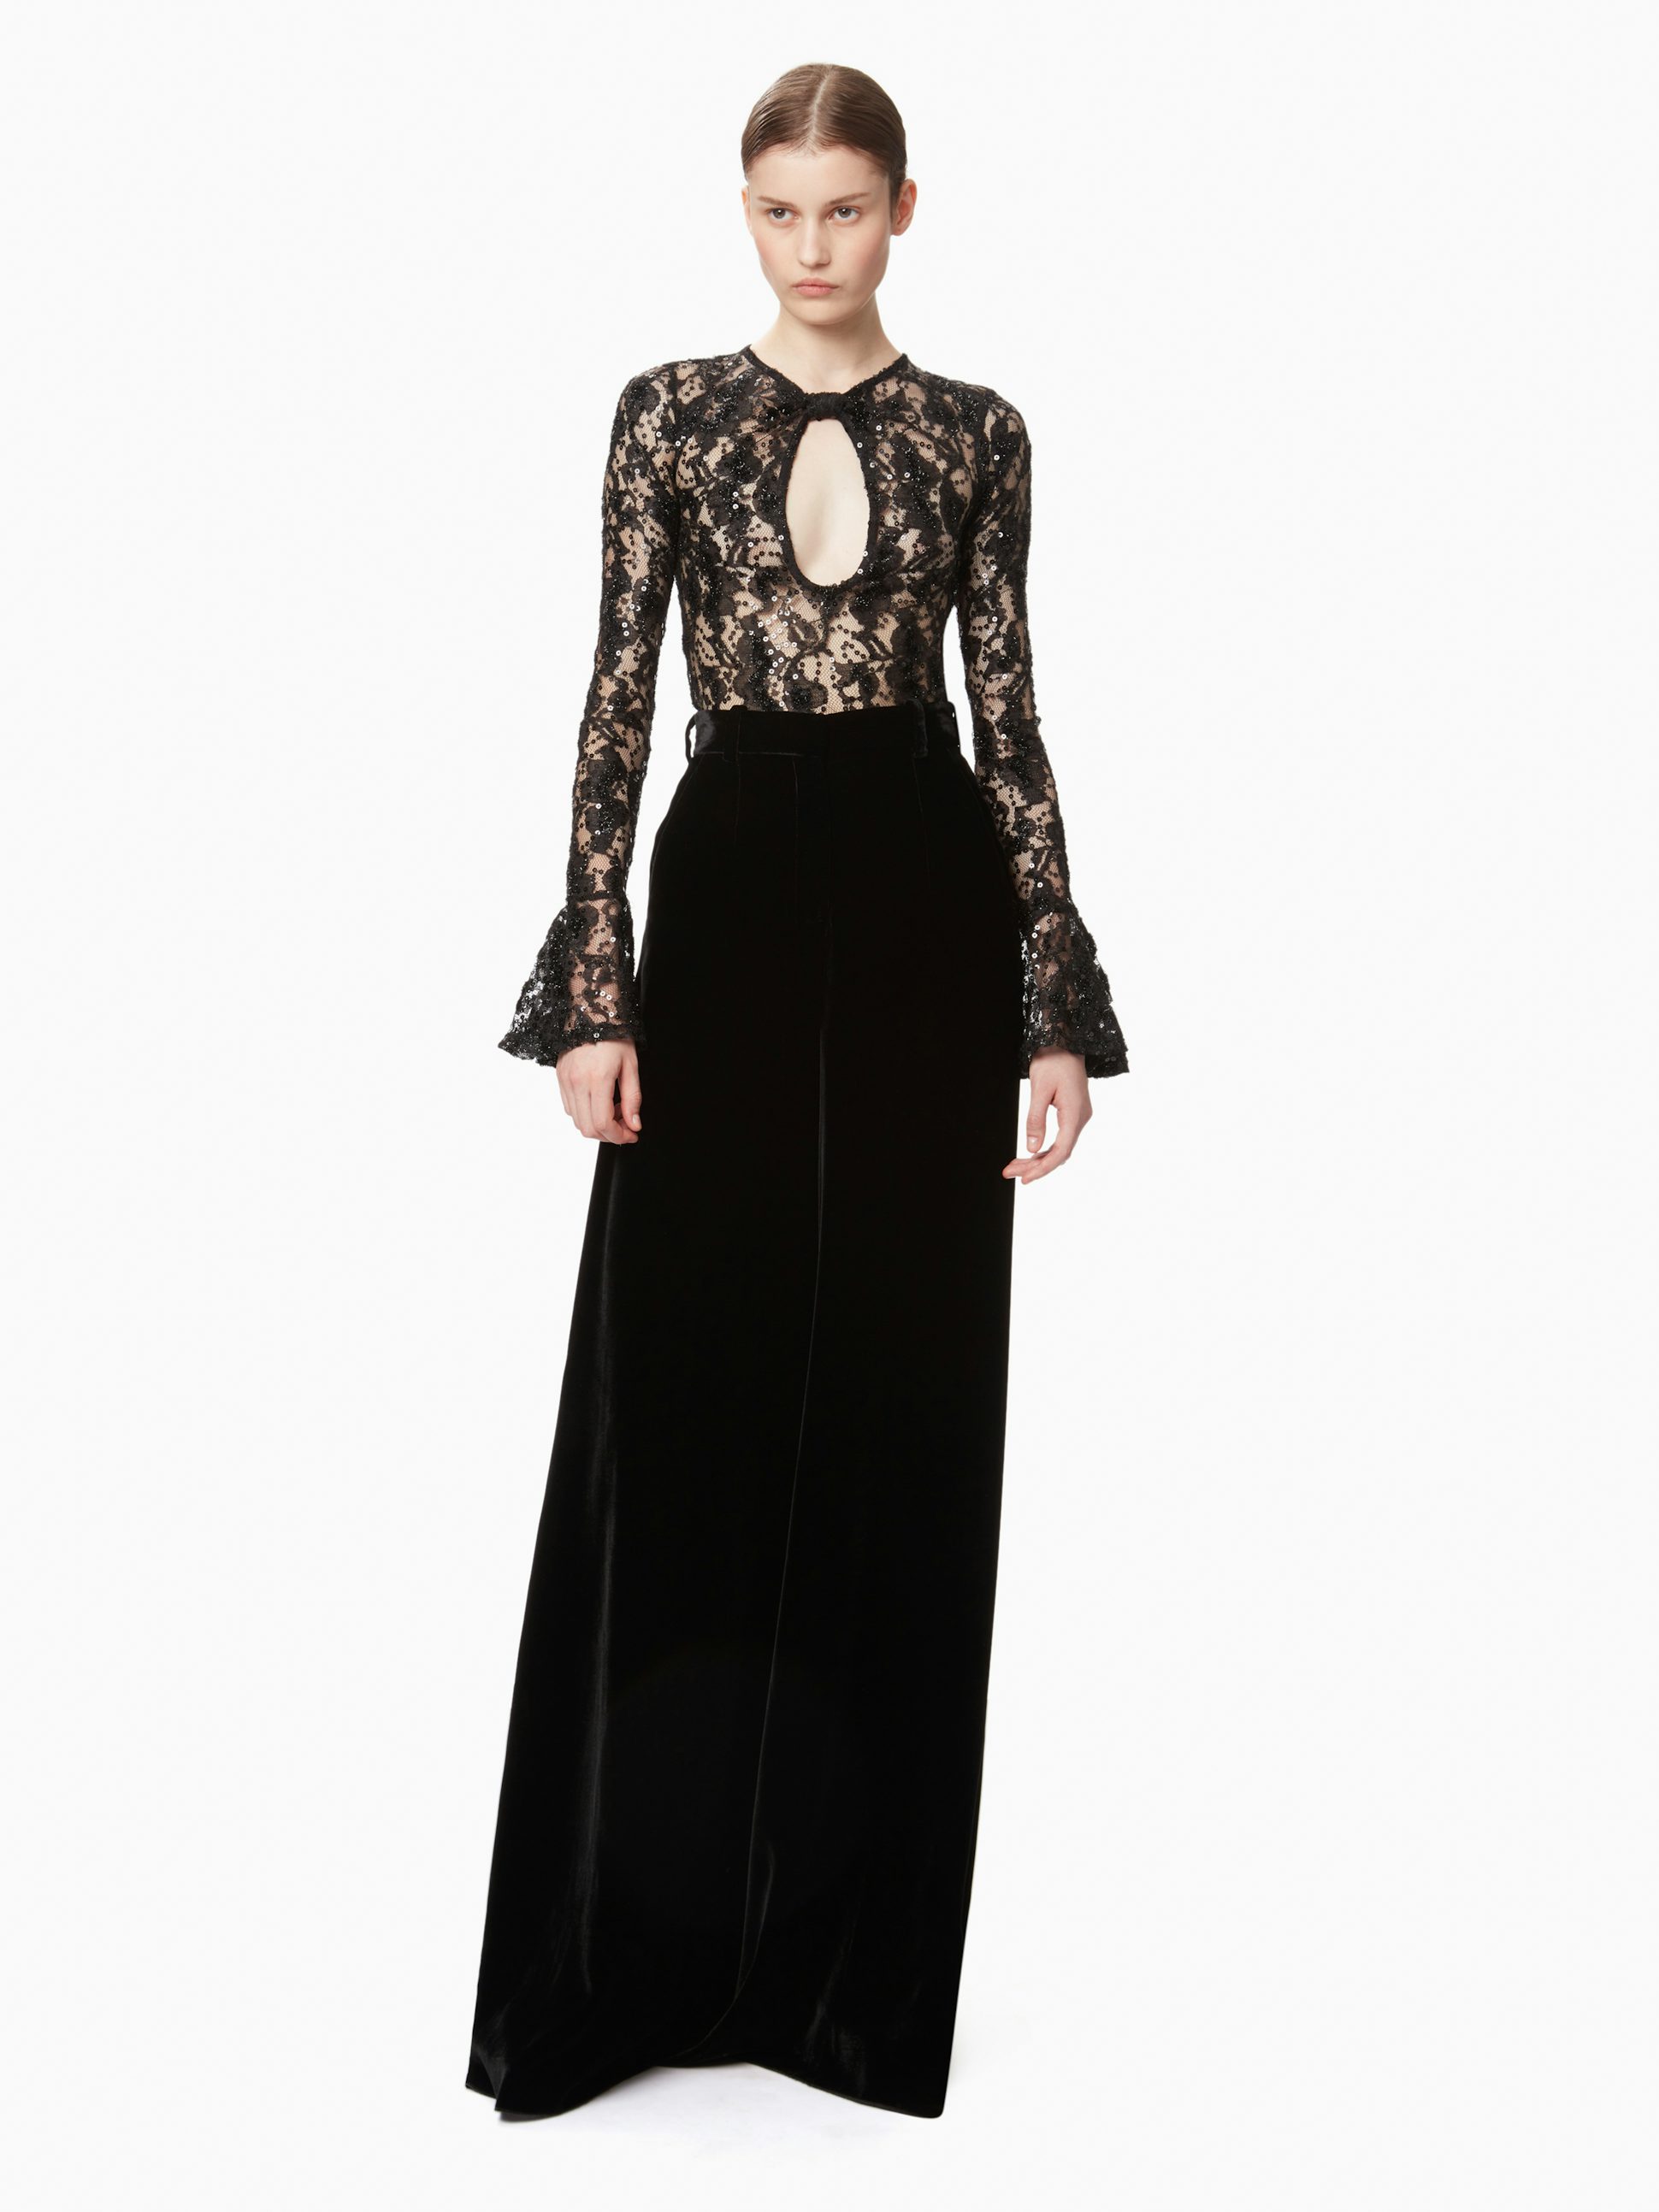 Sequin lace cut-out top in black - Nina Ricci